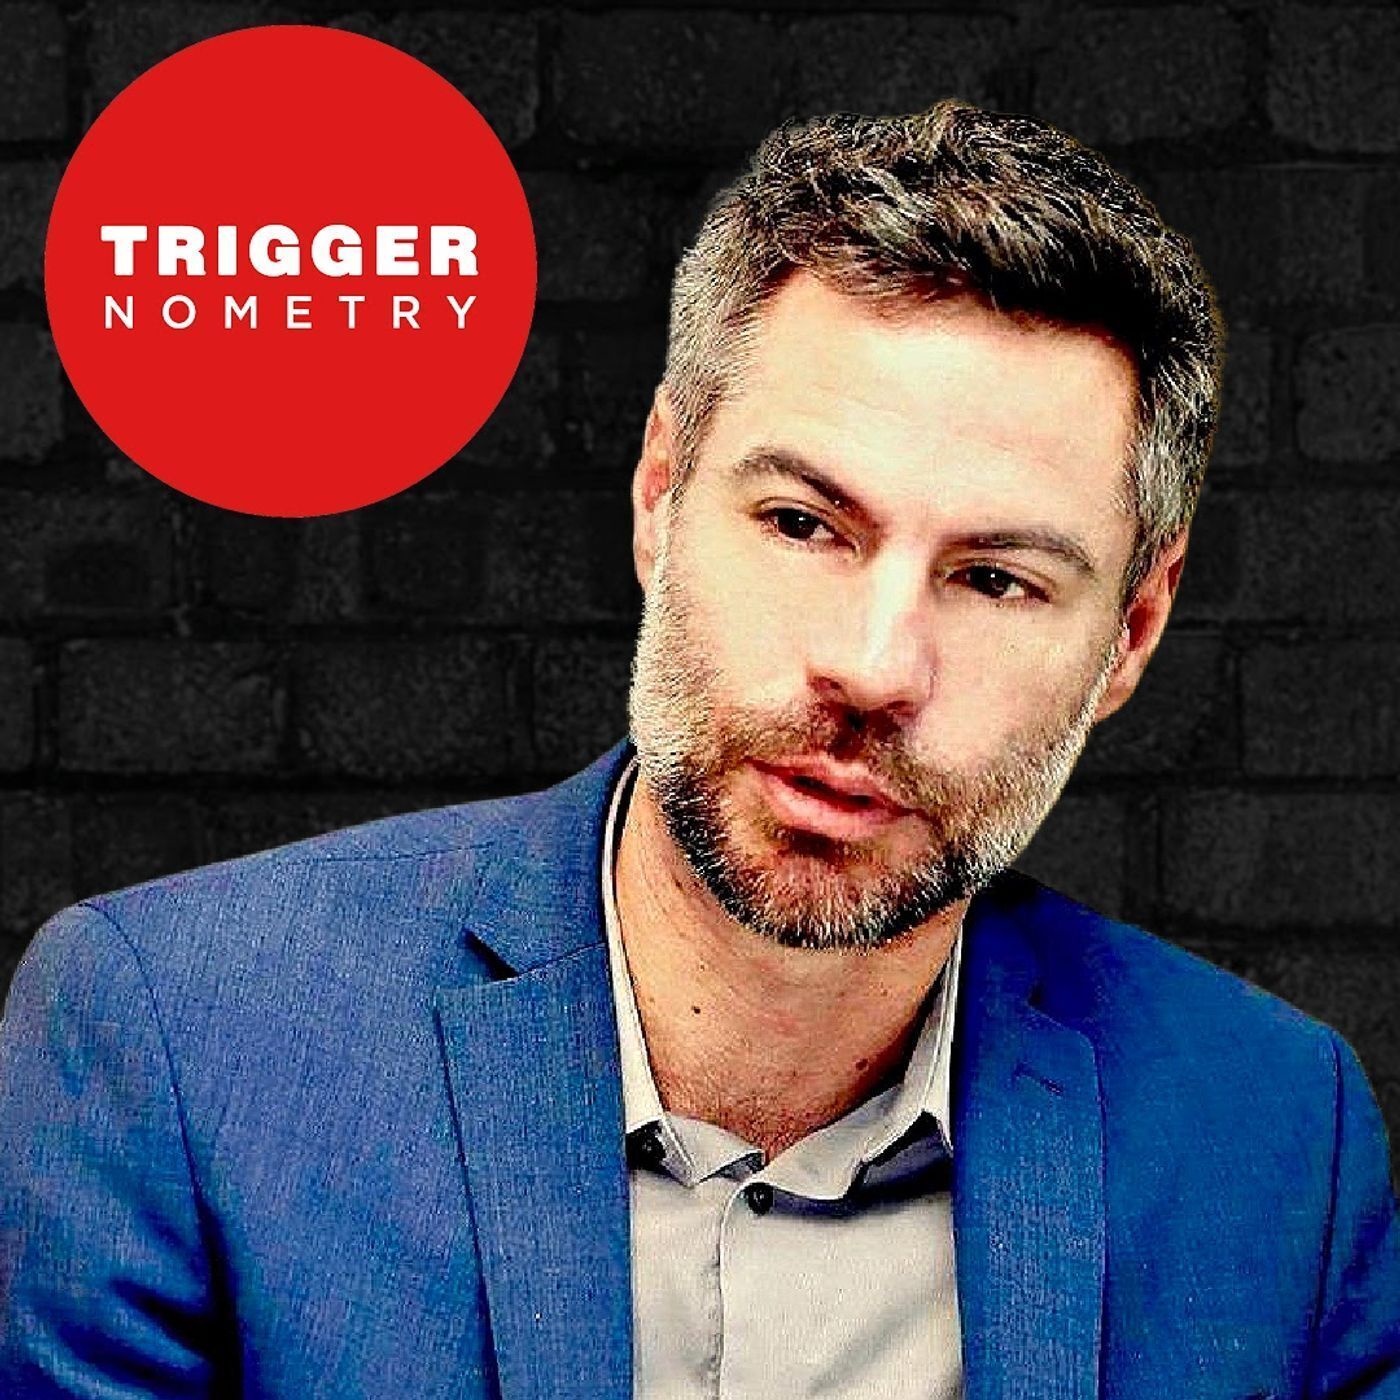 How the Radical Left Has Inflamed Mental Illness, Addiction and Homelessness | Michael Shellenberger